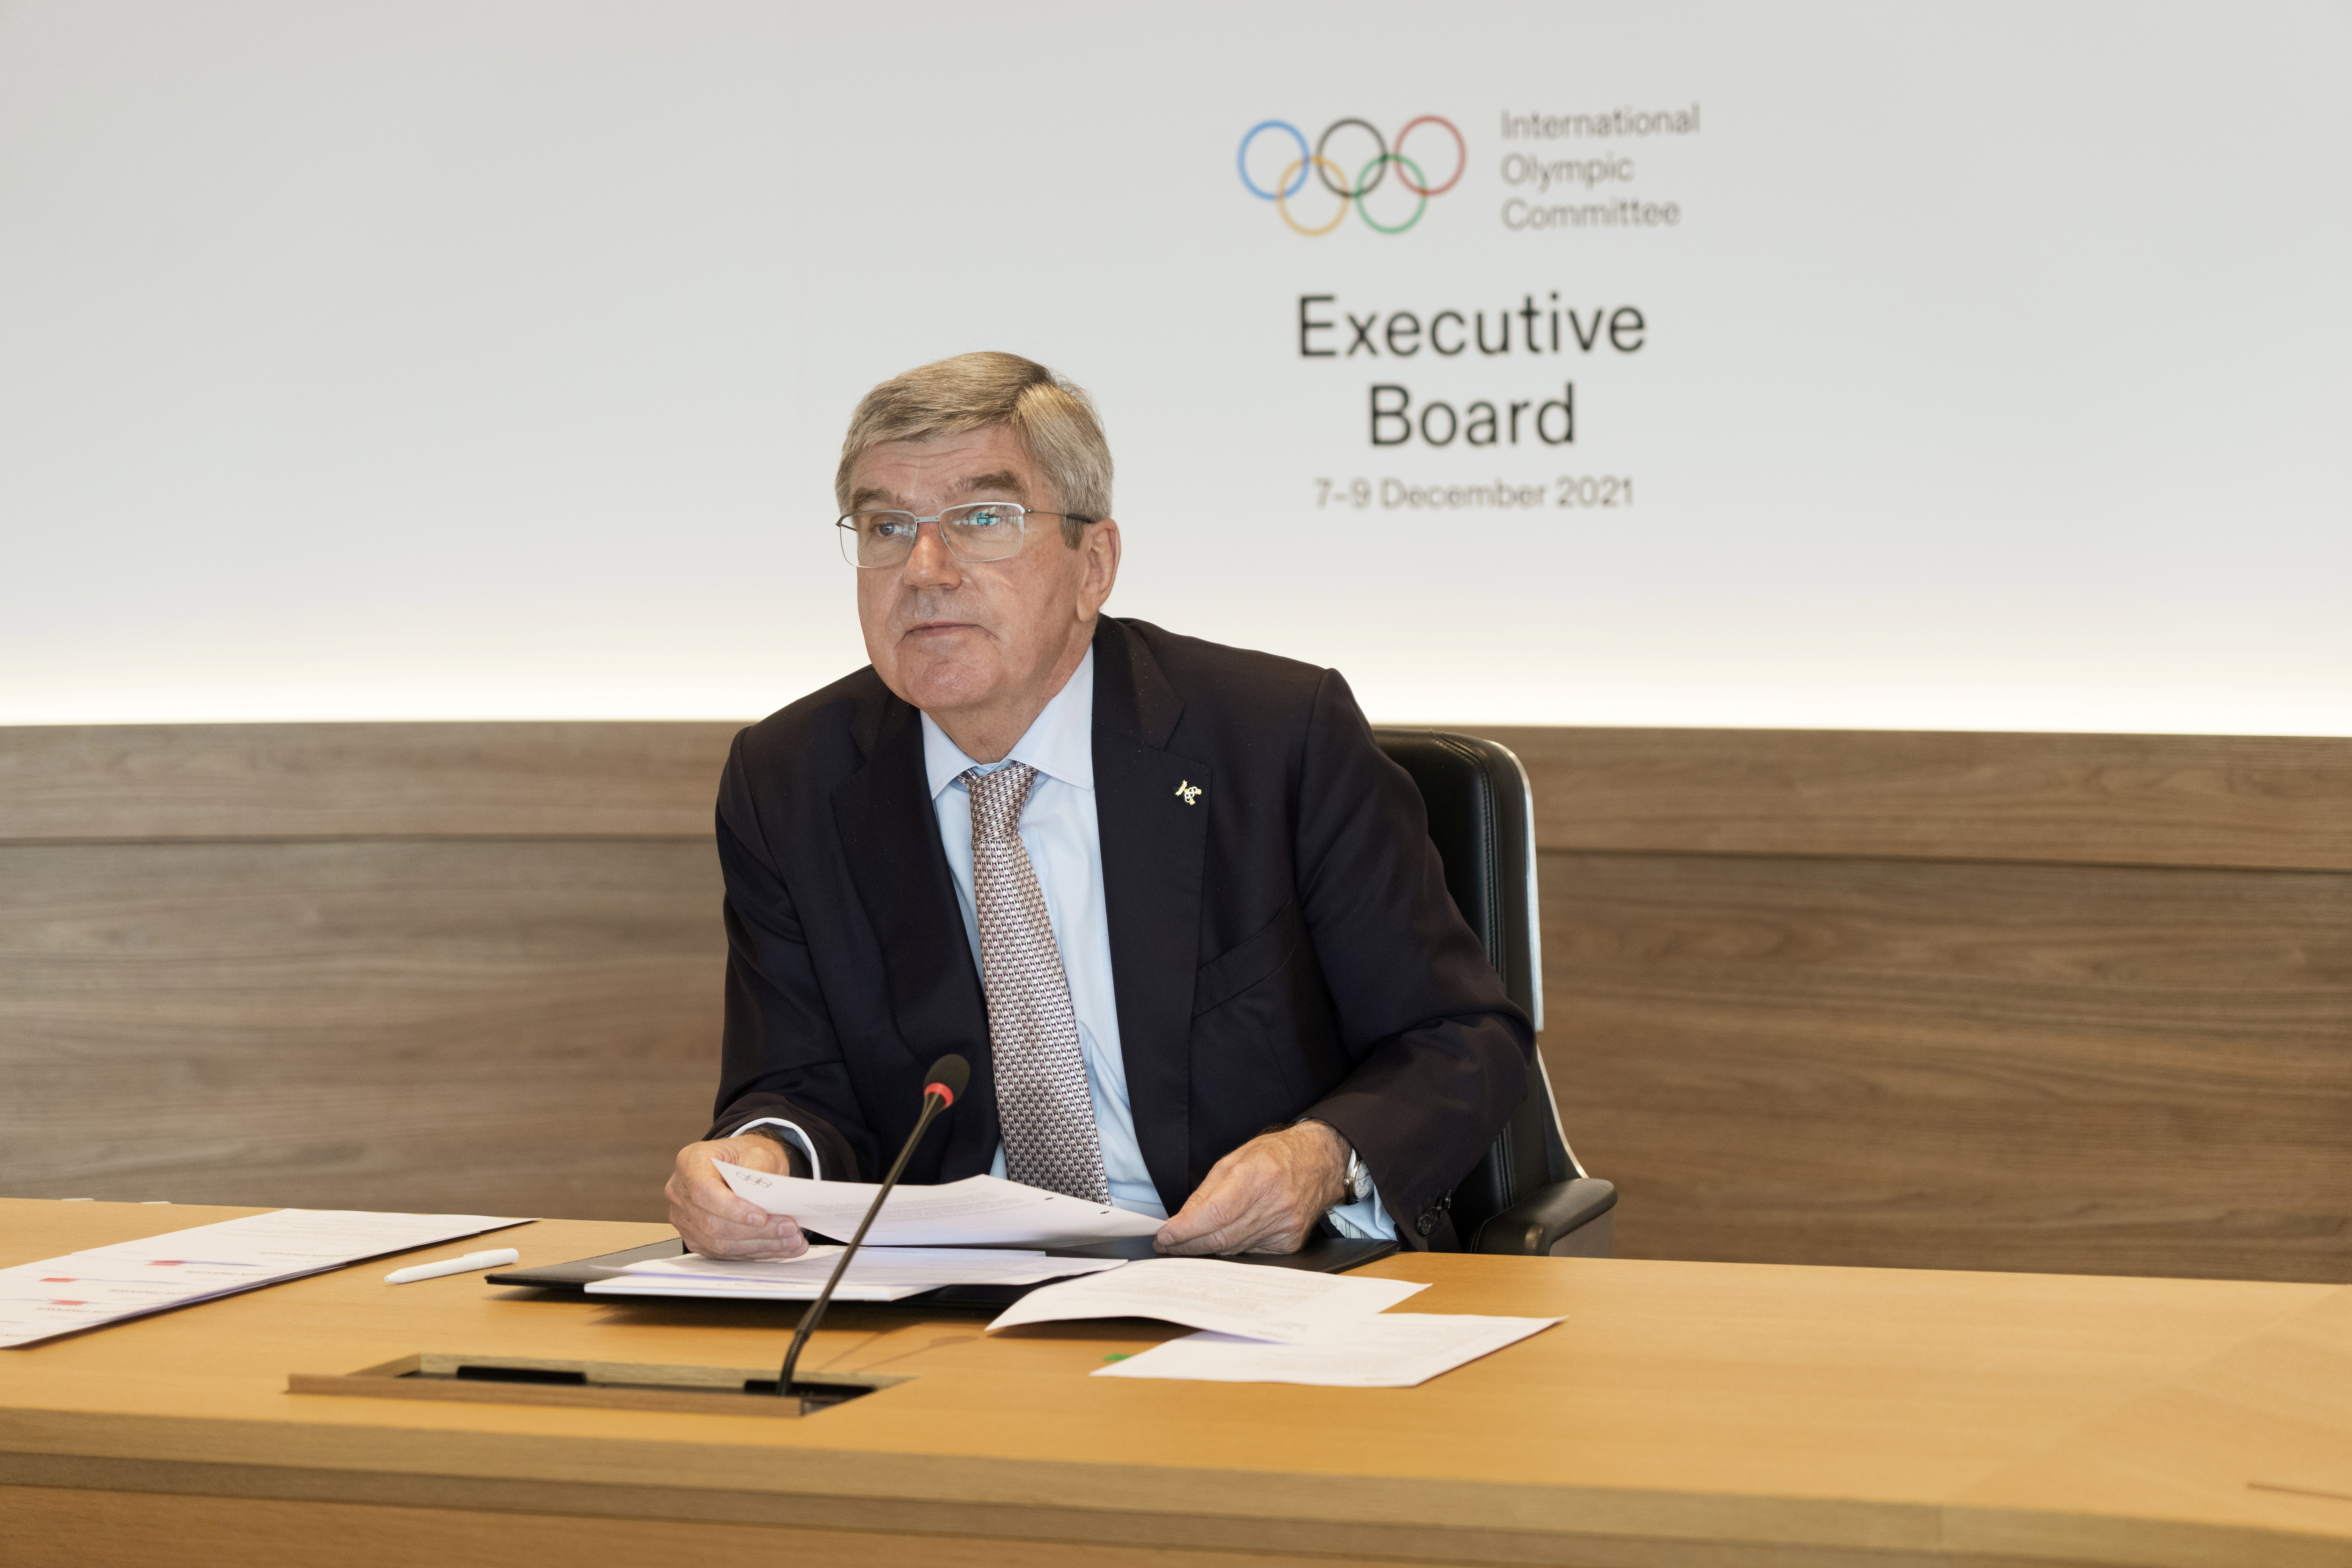 International Olympic Committee President Thomas Bach attends the Executive Board meeting in the lead-up to Beijing 2022 at the Olympic House in Lausanne, Switzerland, December 9, 2021. Greg Martin/IOC/Handout via REUTERS THIS IMAGE HAS BEEN SUPPLIED BY A THIRD PARTY. NO RESALES. NO ARCHIVES